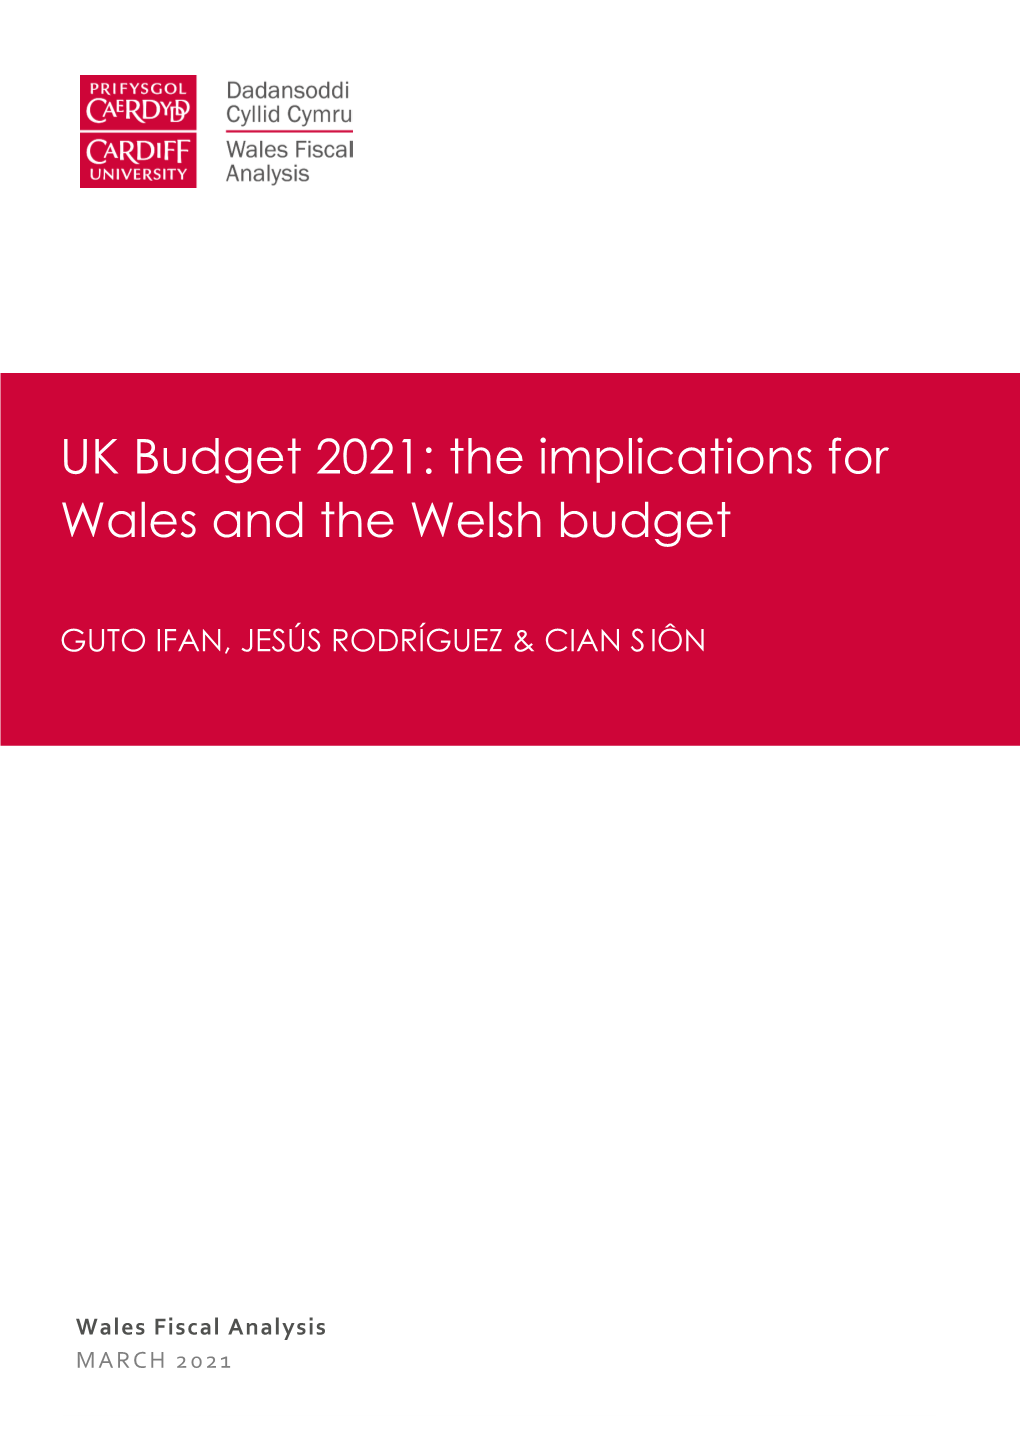 UK Budget 2021: the Implications for Wales and the Welsh Budget